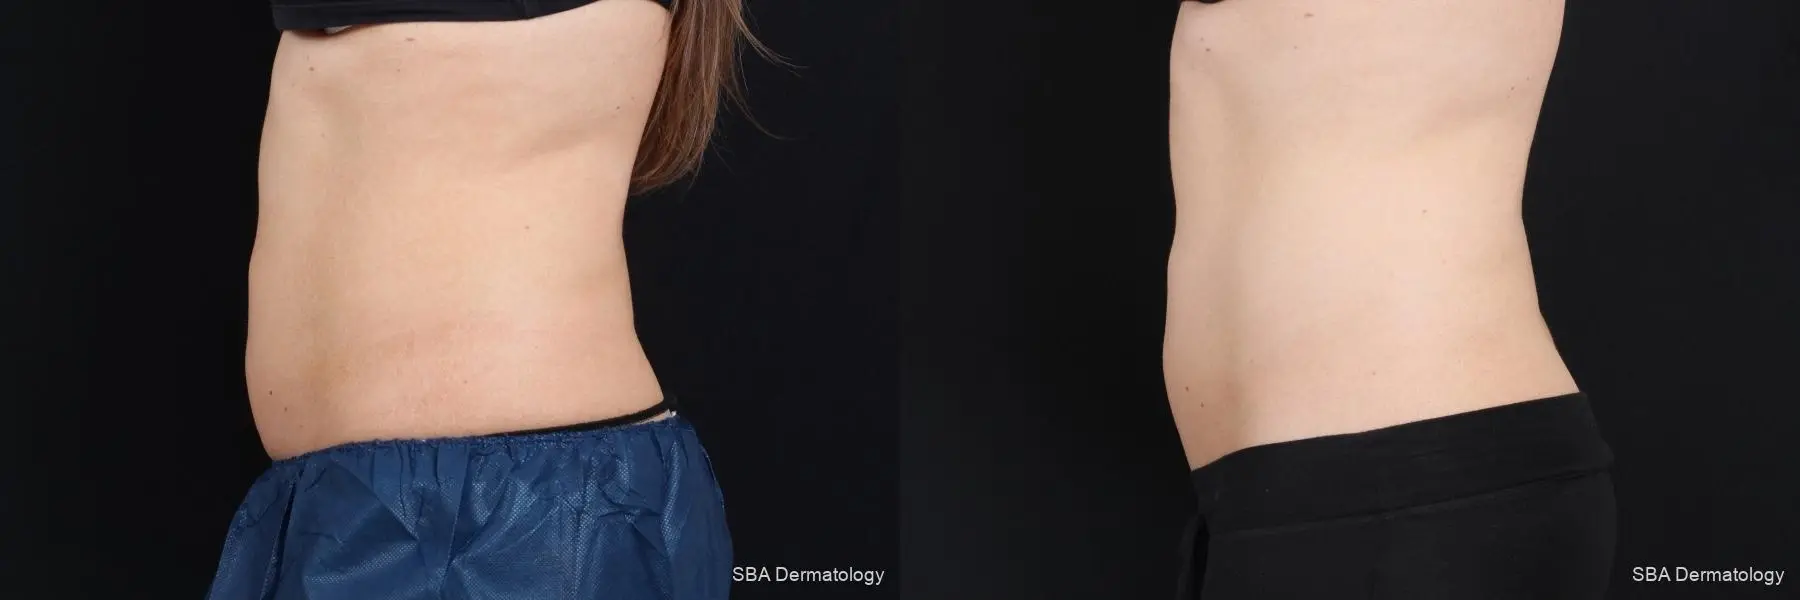 Coolsculpting: Patient 7 - Before and After 3